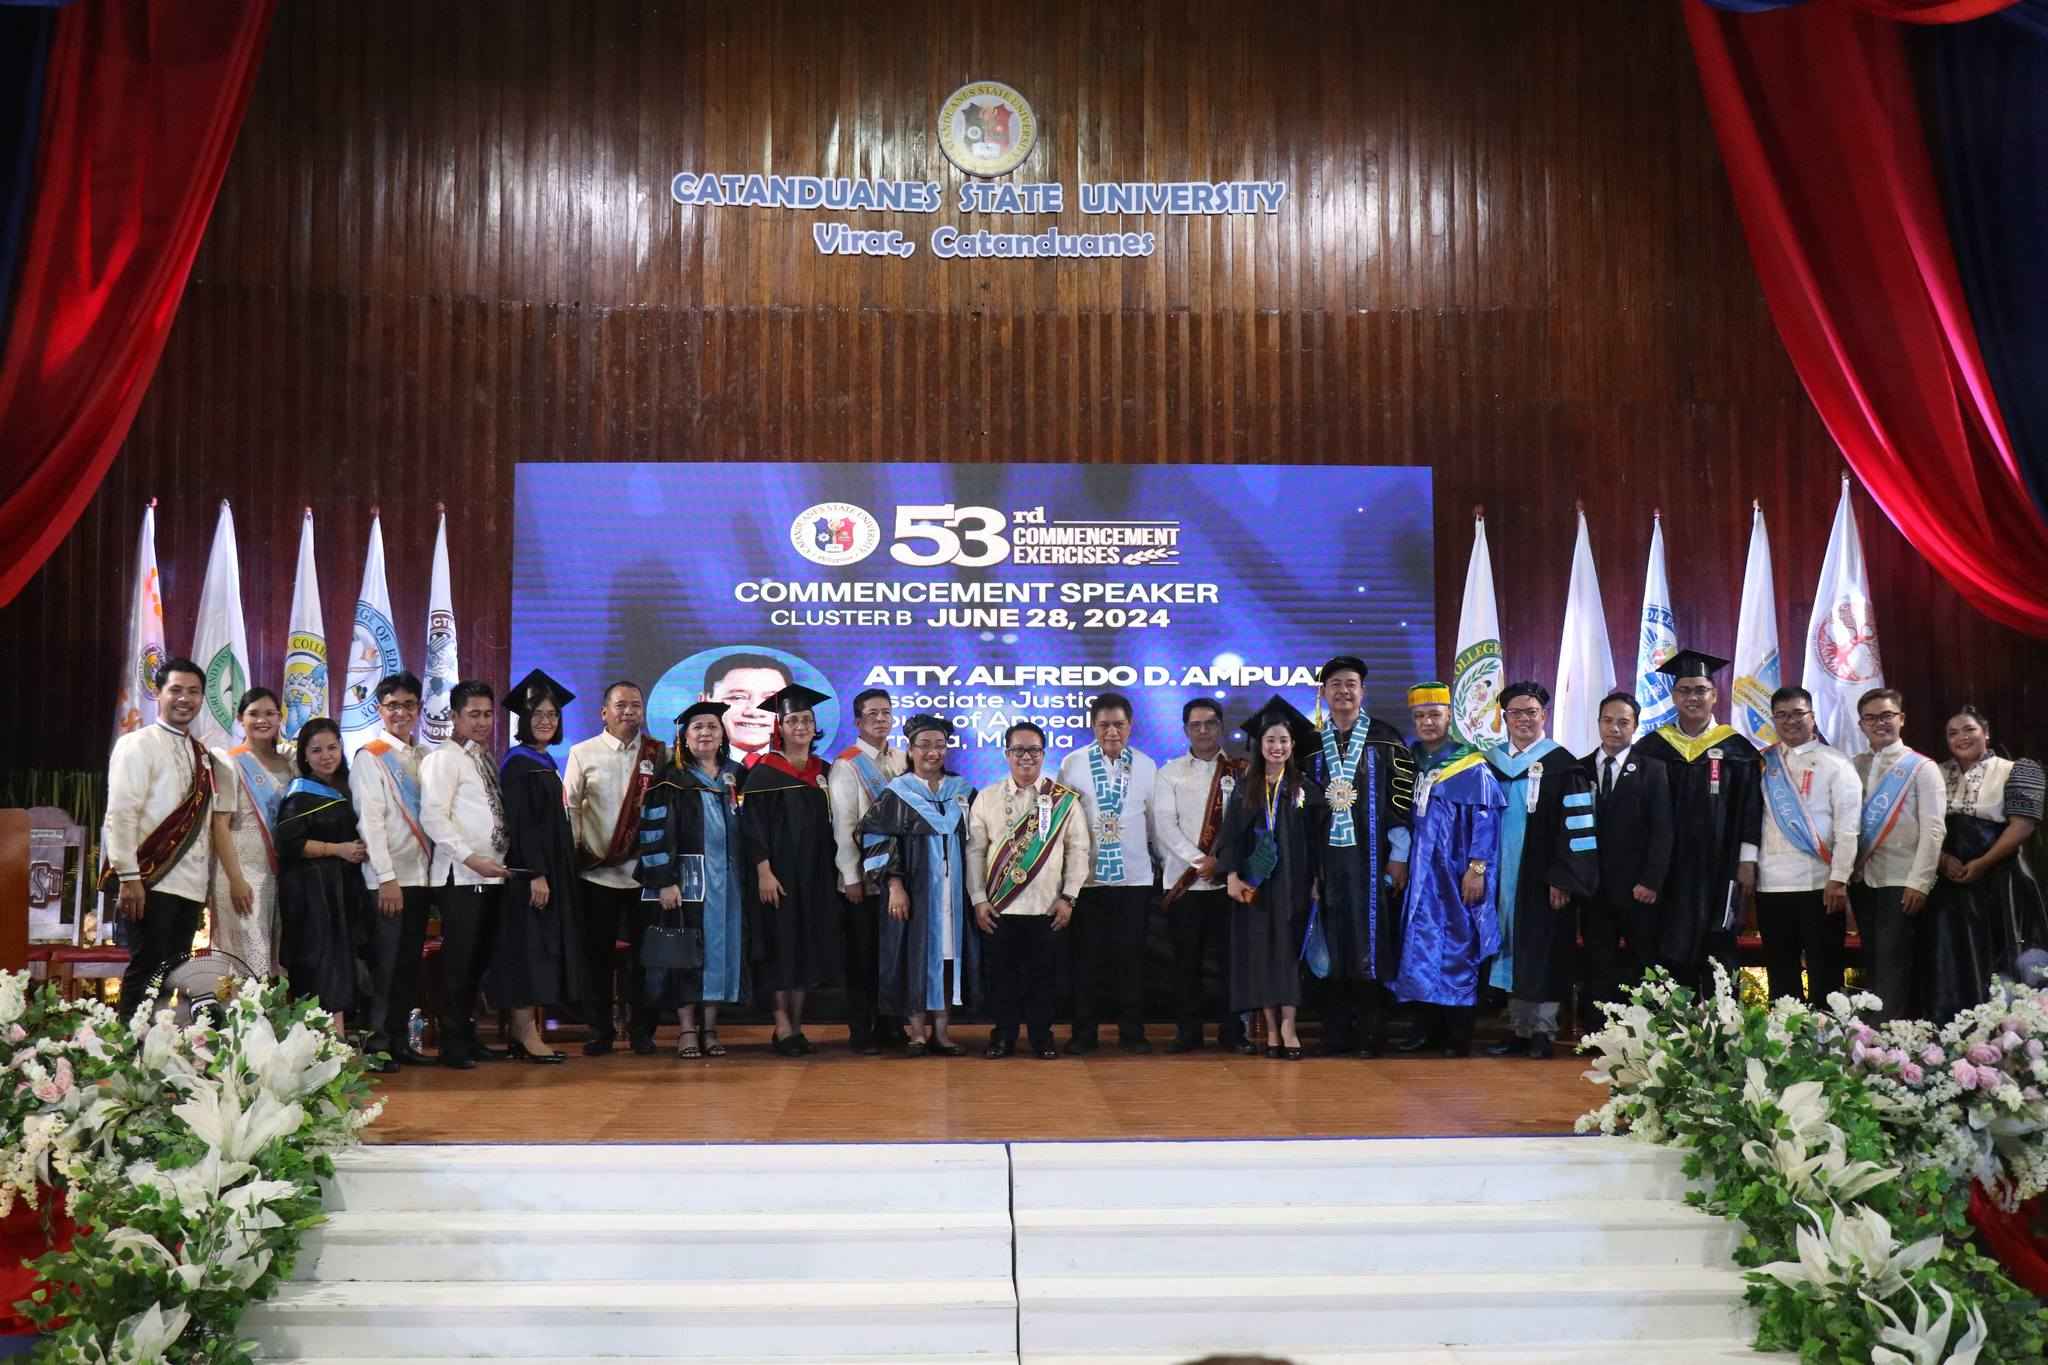 Retired Justice Atty. Alfredo D. Ampuan challenges graduates to seek meaning beyond diplomas